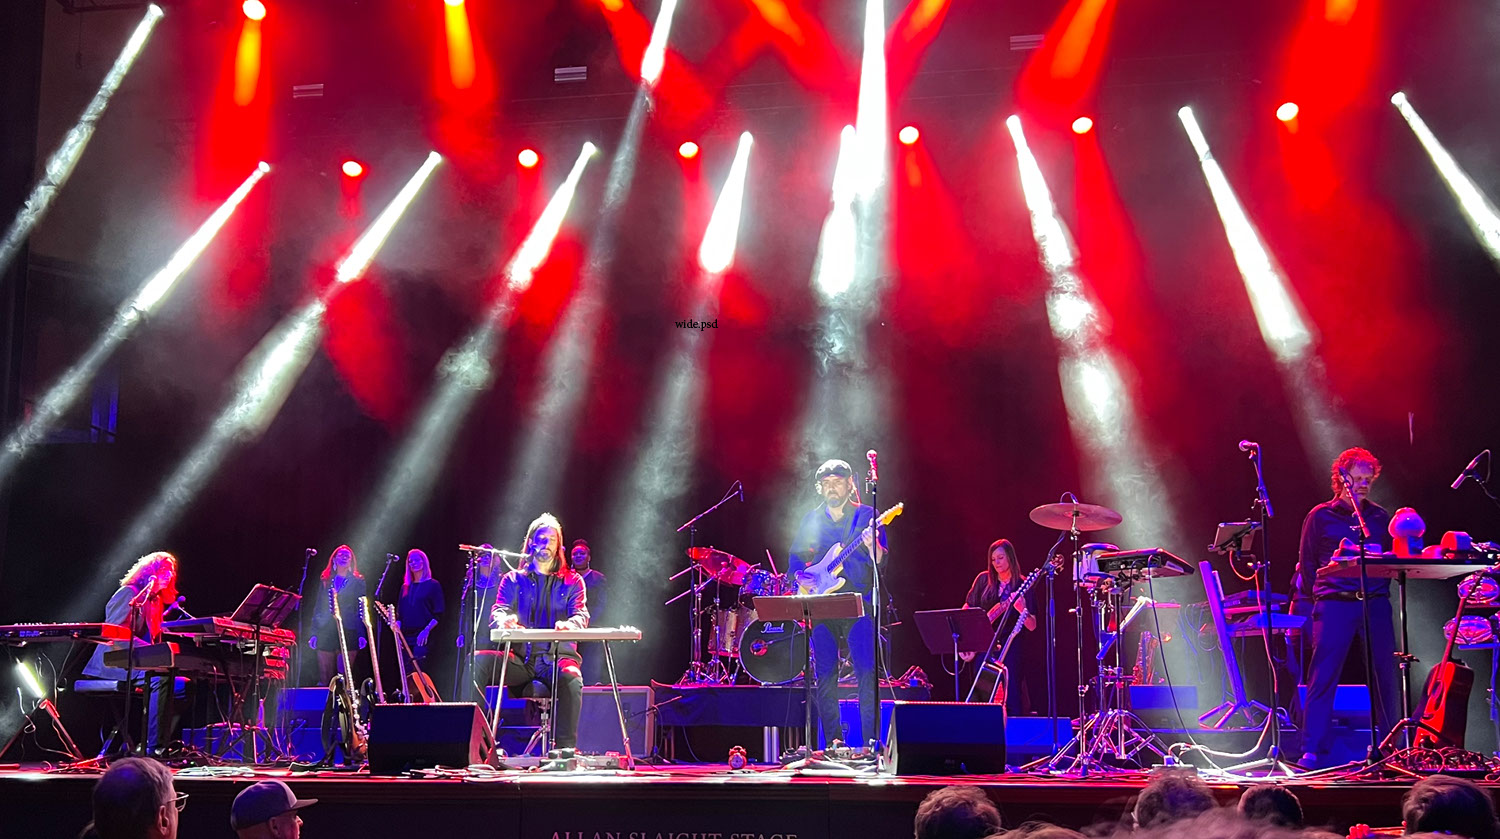 Image of several musicians performing on stage. White rays of light cut through smoke, which is backlit in red. The artists on stage are highlighted in shades of deep blue and red. They play an array of instruments including guitars, the piano, drums and a keyboard. Several music stands, microphones and cables are splayed across the stage. In front of the stage, the backs of people watching the performance can be seen. 